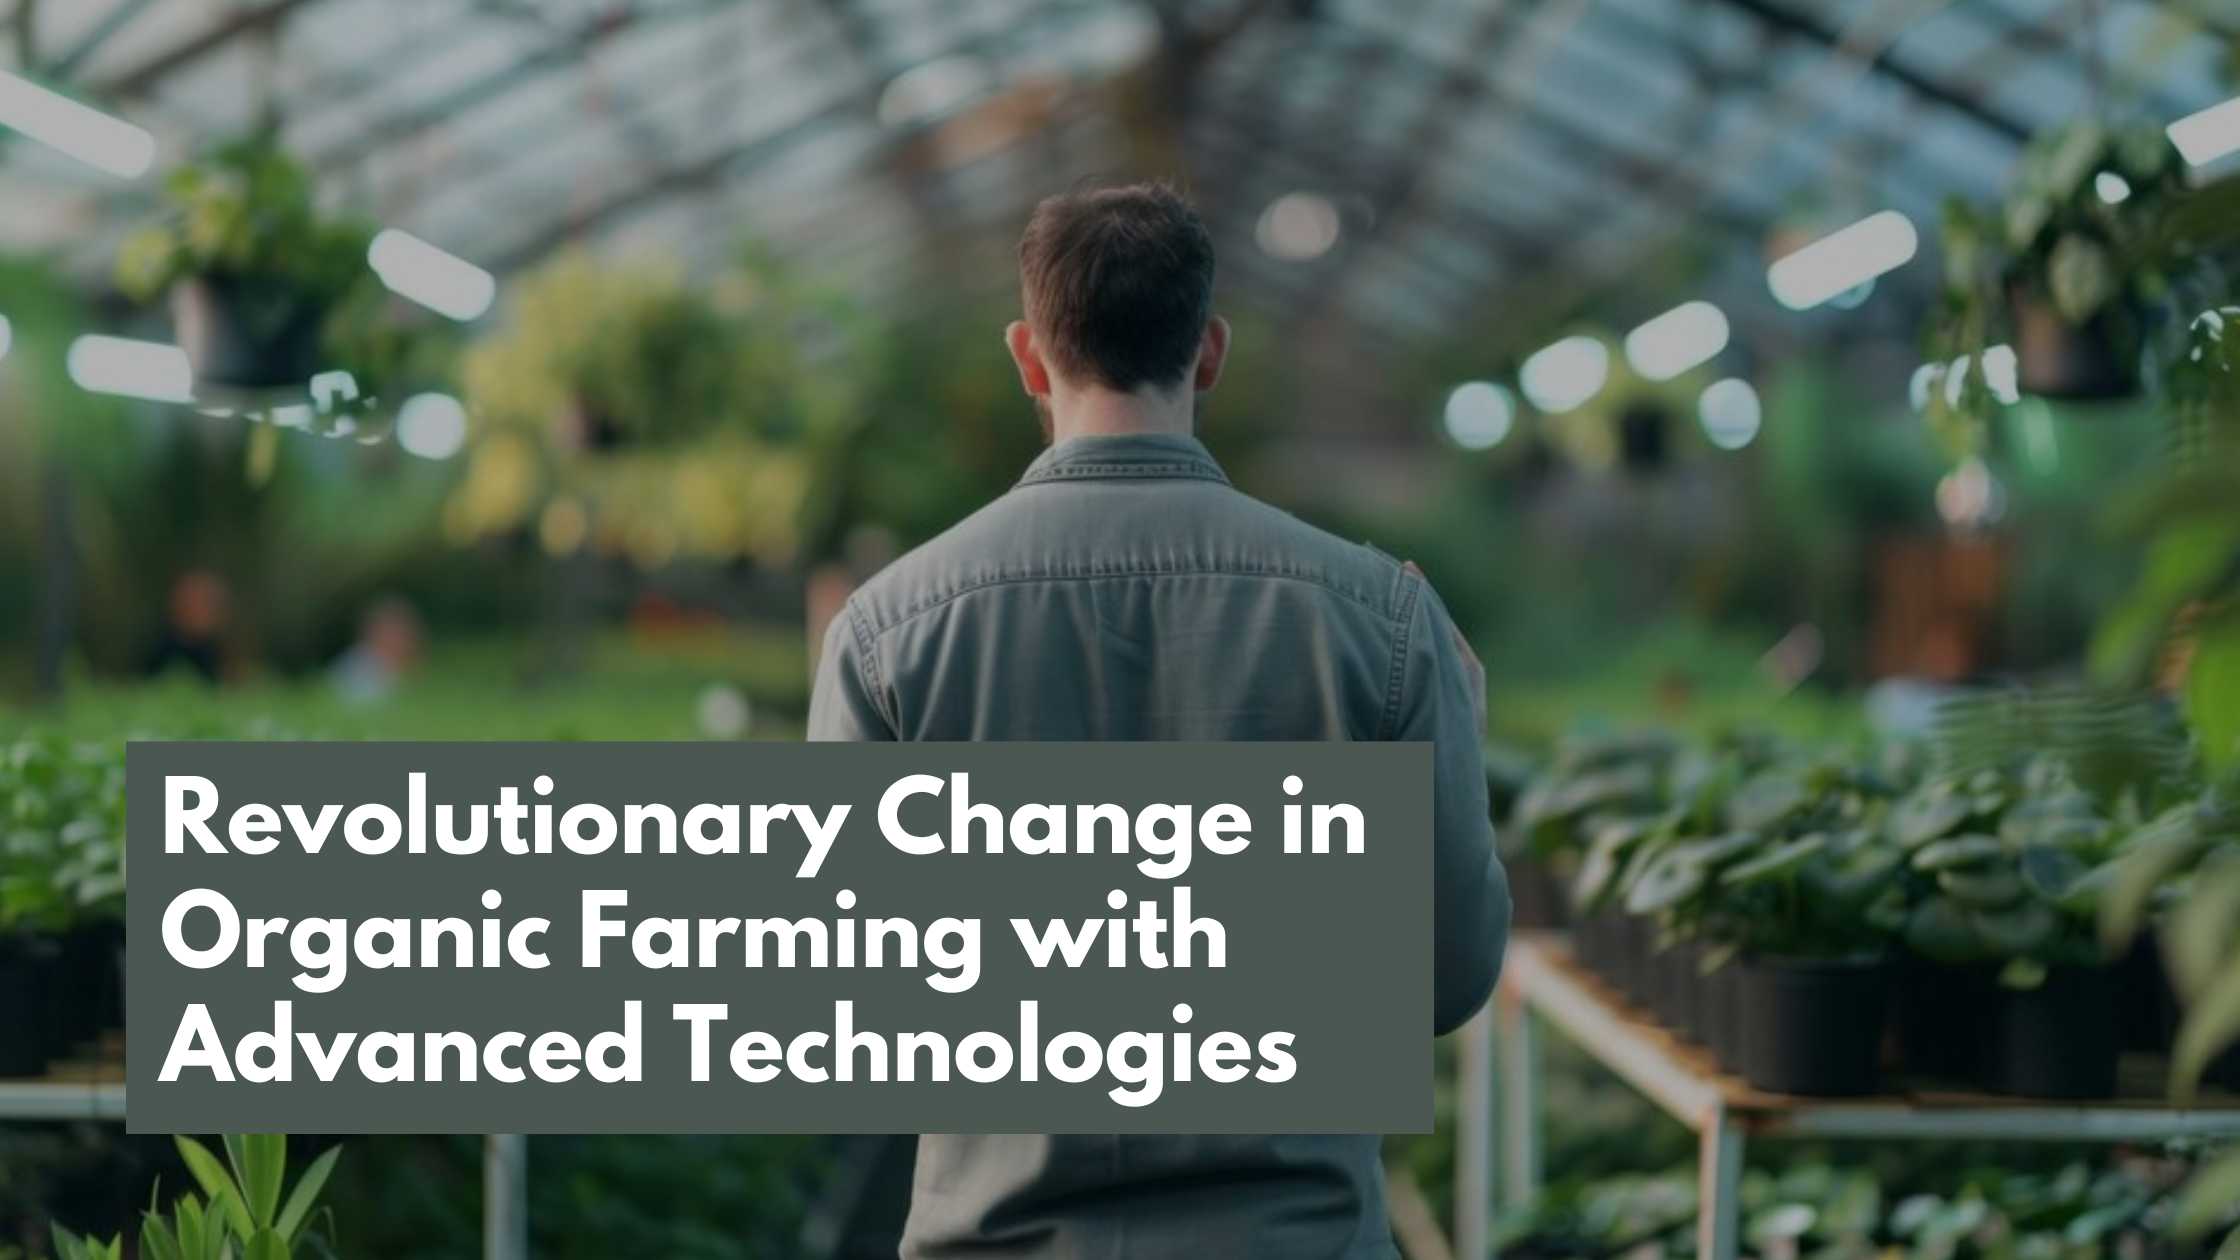 Revolutionary Change in Organic Farming with Advanced Technologies